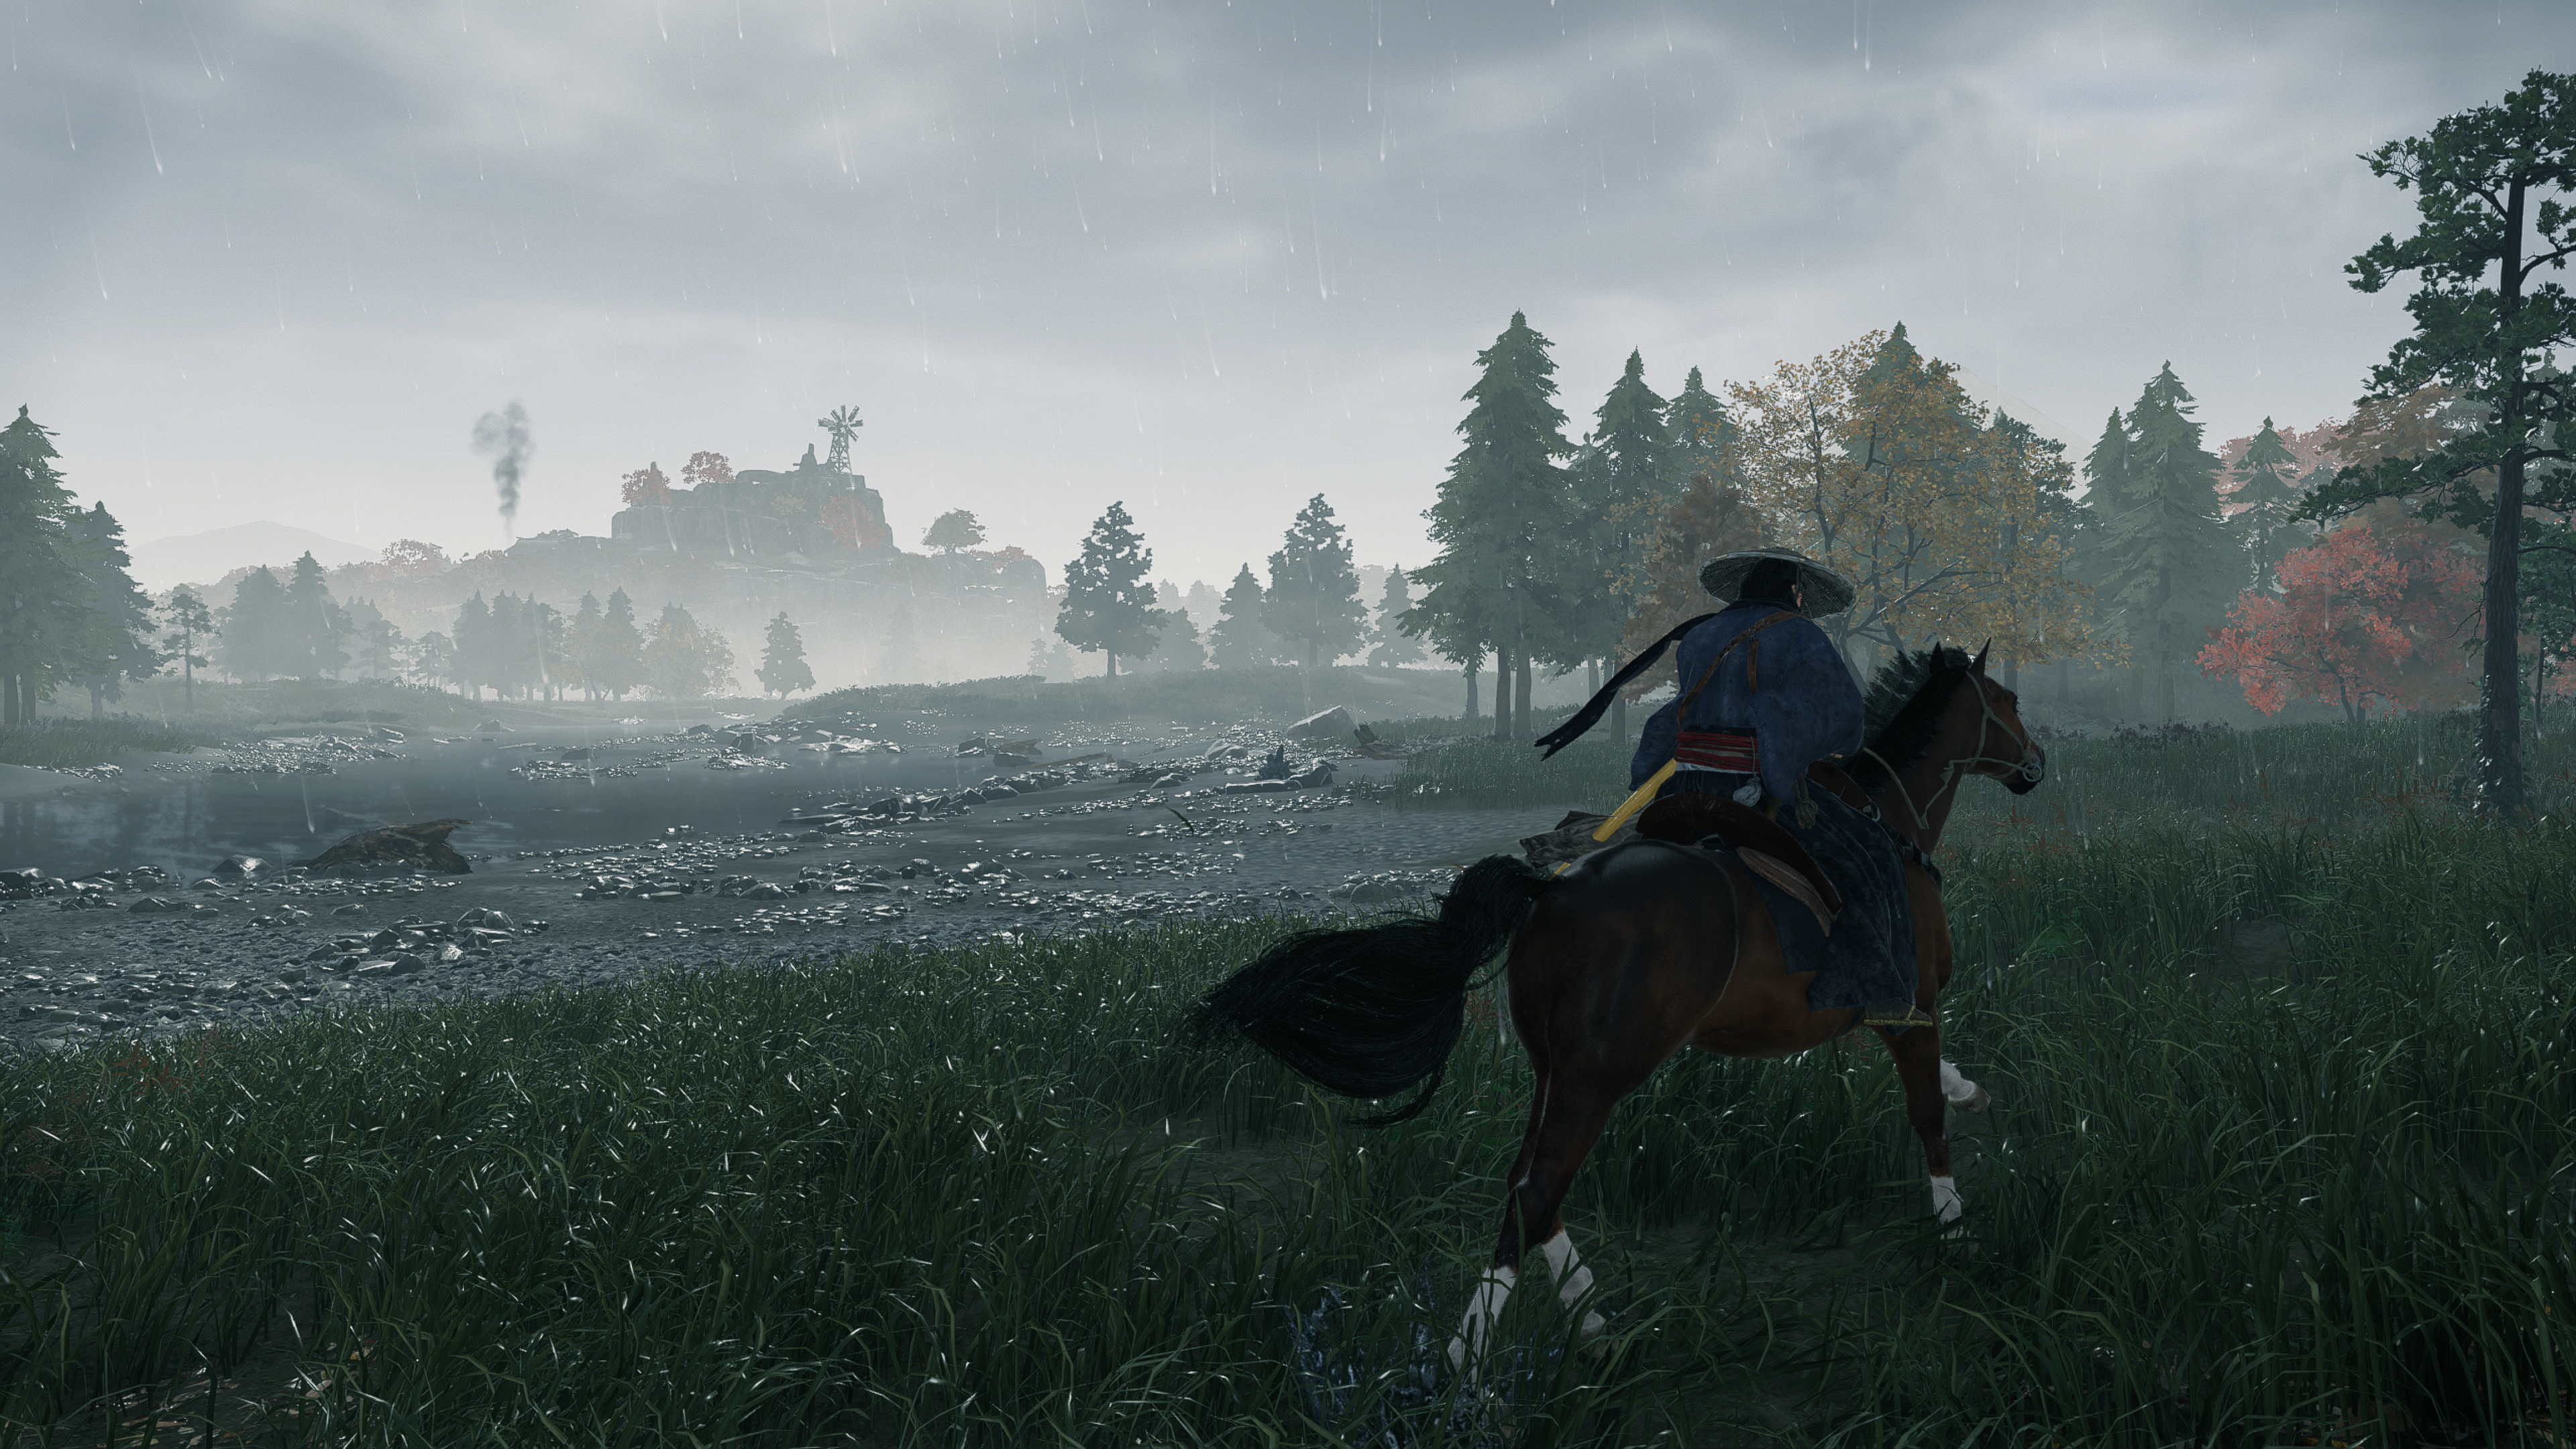 Riding through the world in Rise of the Ronin